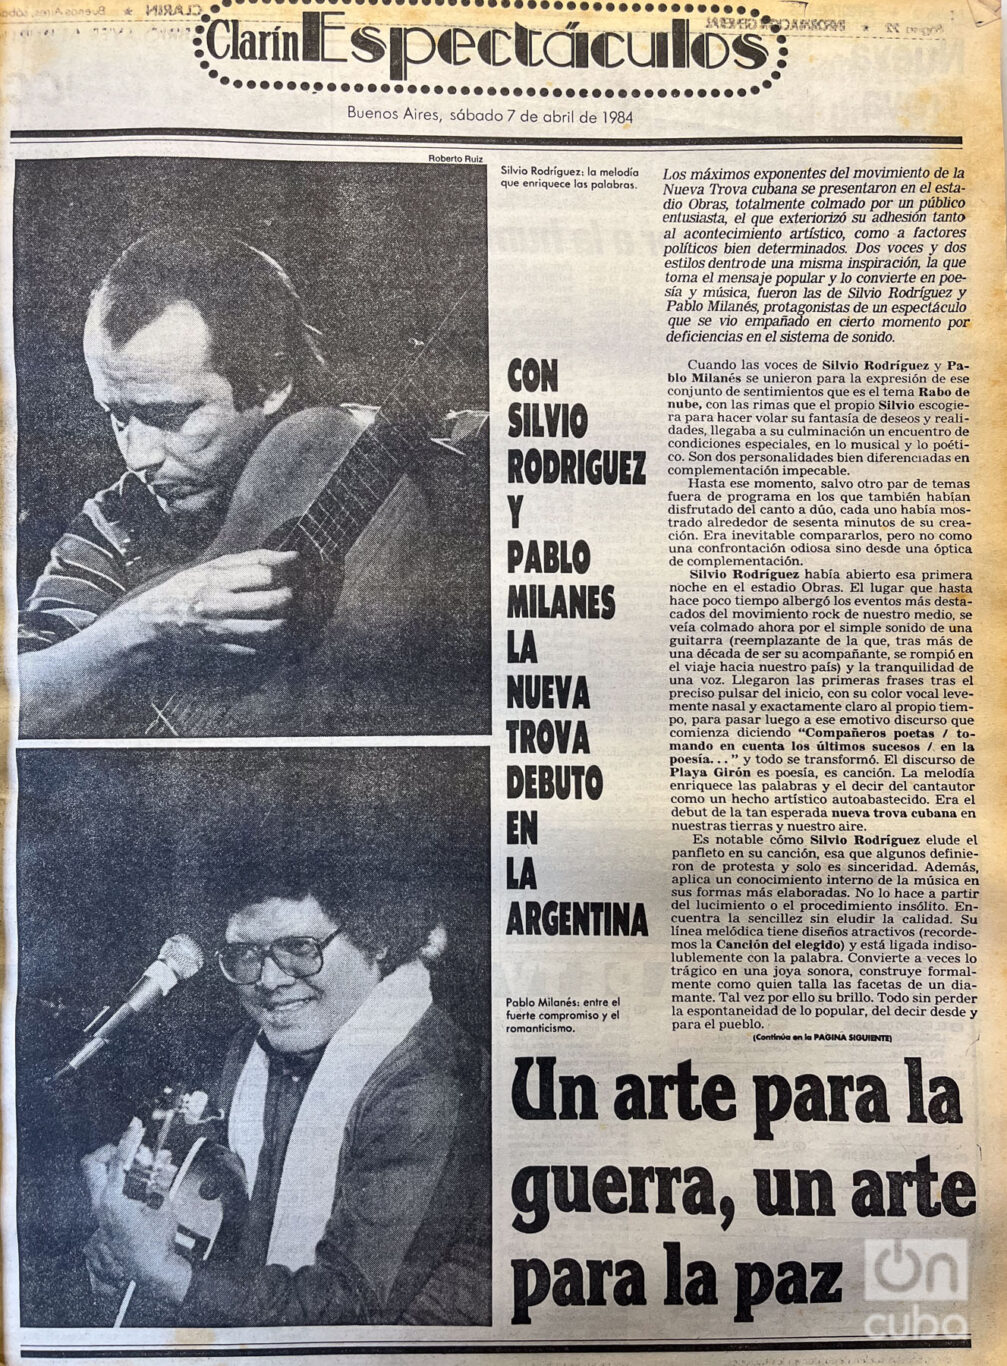 Full page dedicated to the presentations of Silvio and Pablo in the Entertainment section of the Clarín newspaper.